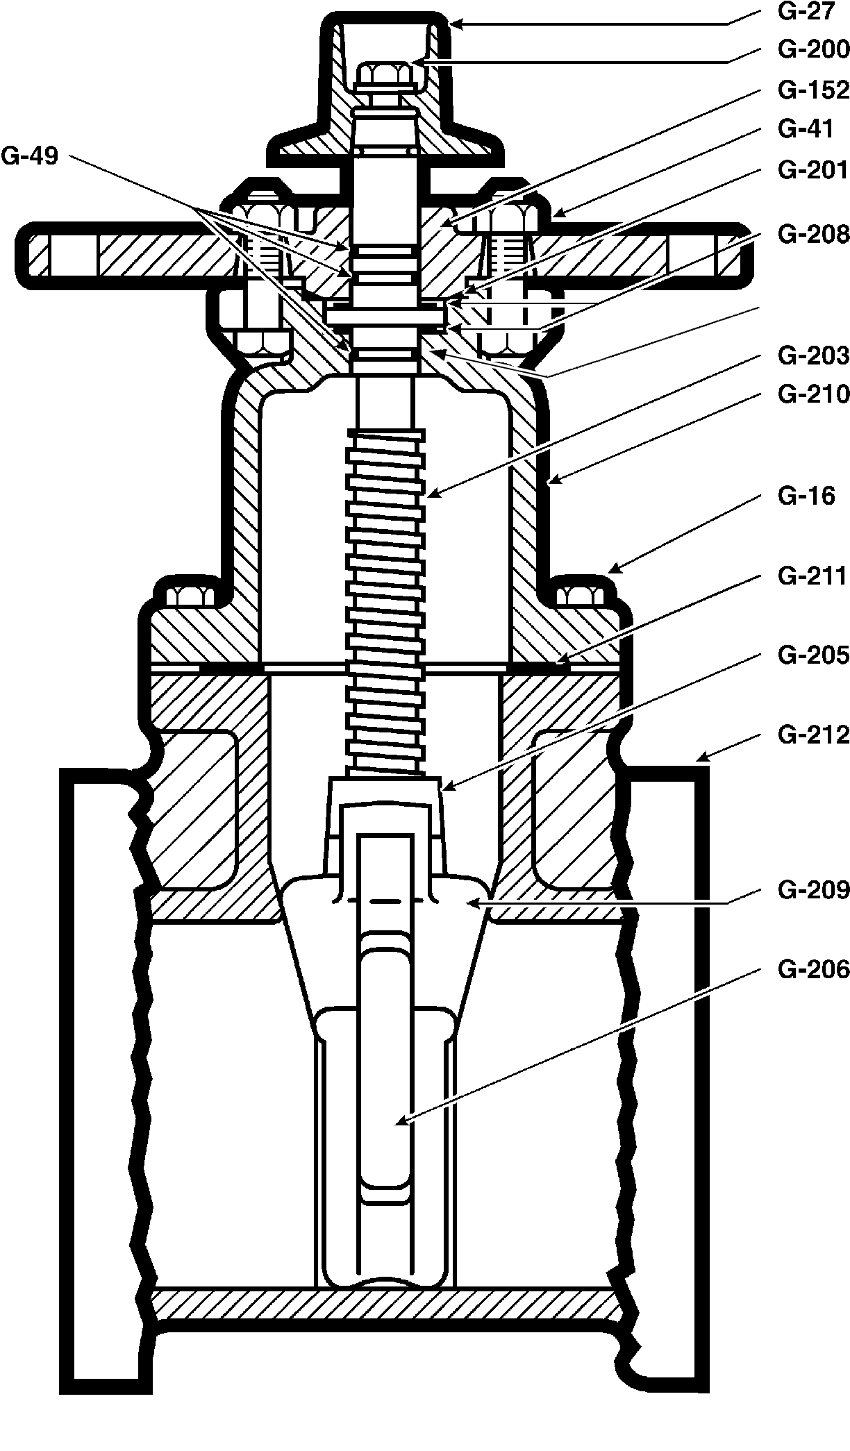 P-USP1-16 FLxMJ 14-24in Parts Drawing